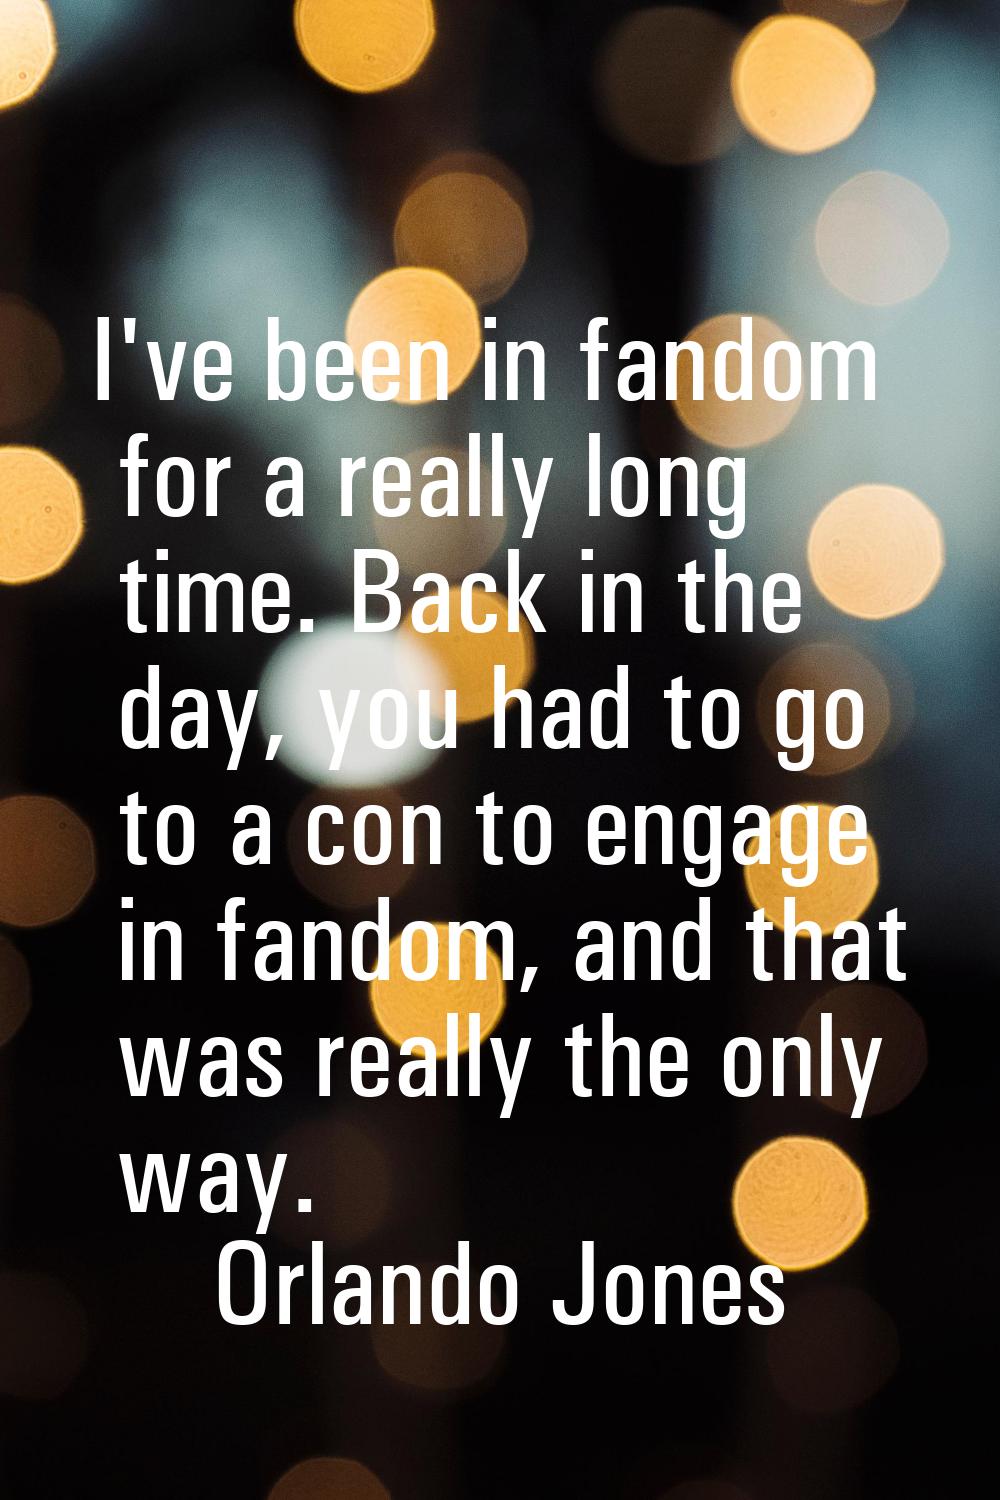 I've been in fandom for a really long time. Back in the day, you had to go to a con to engage in fa